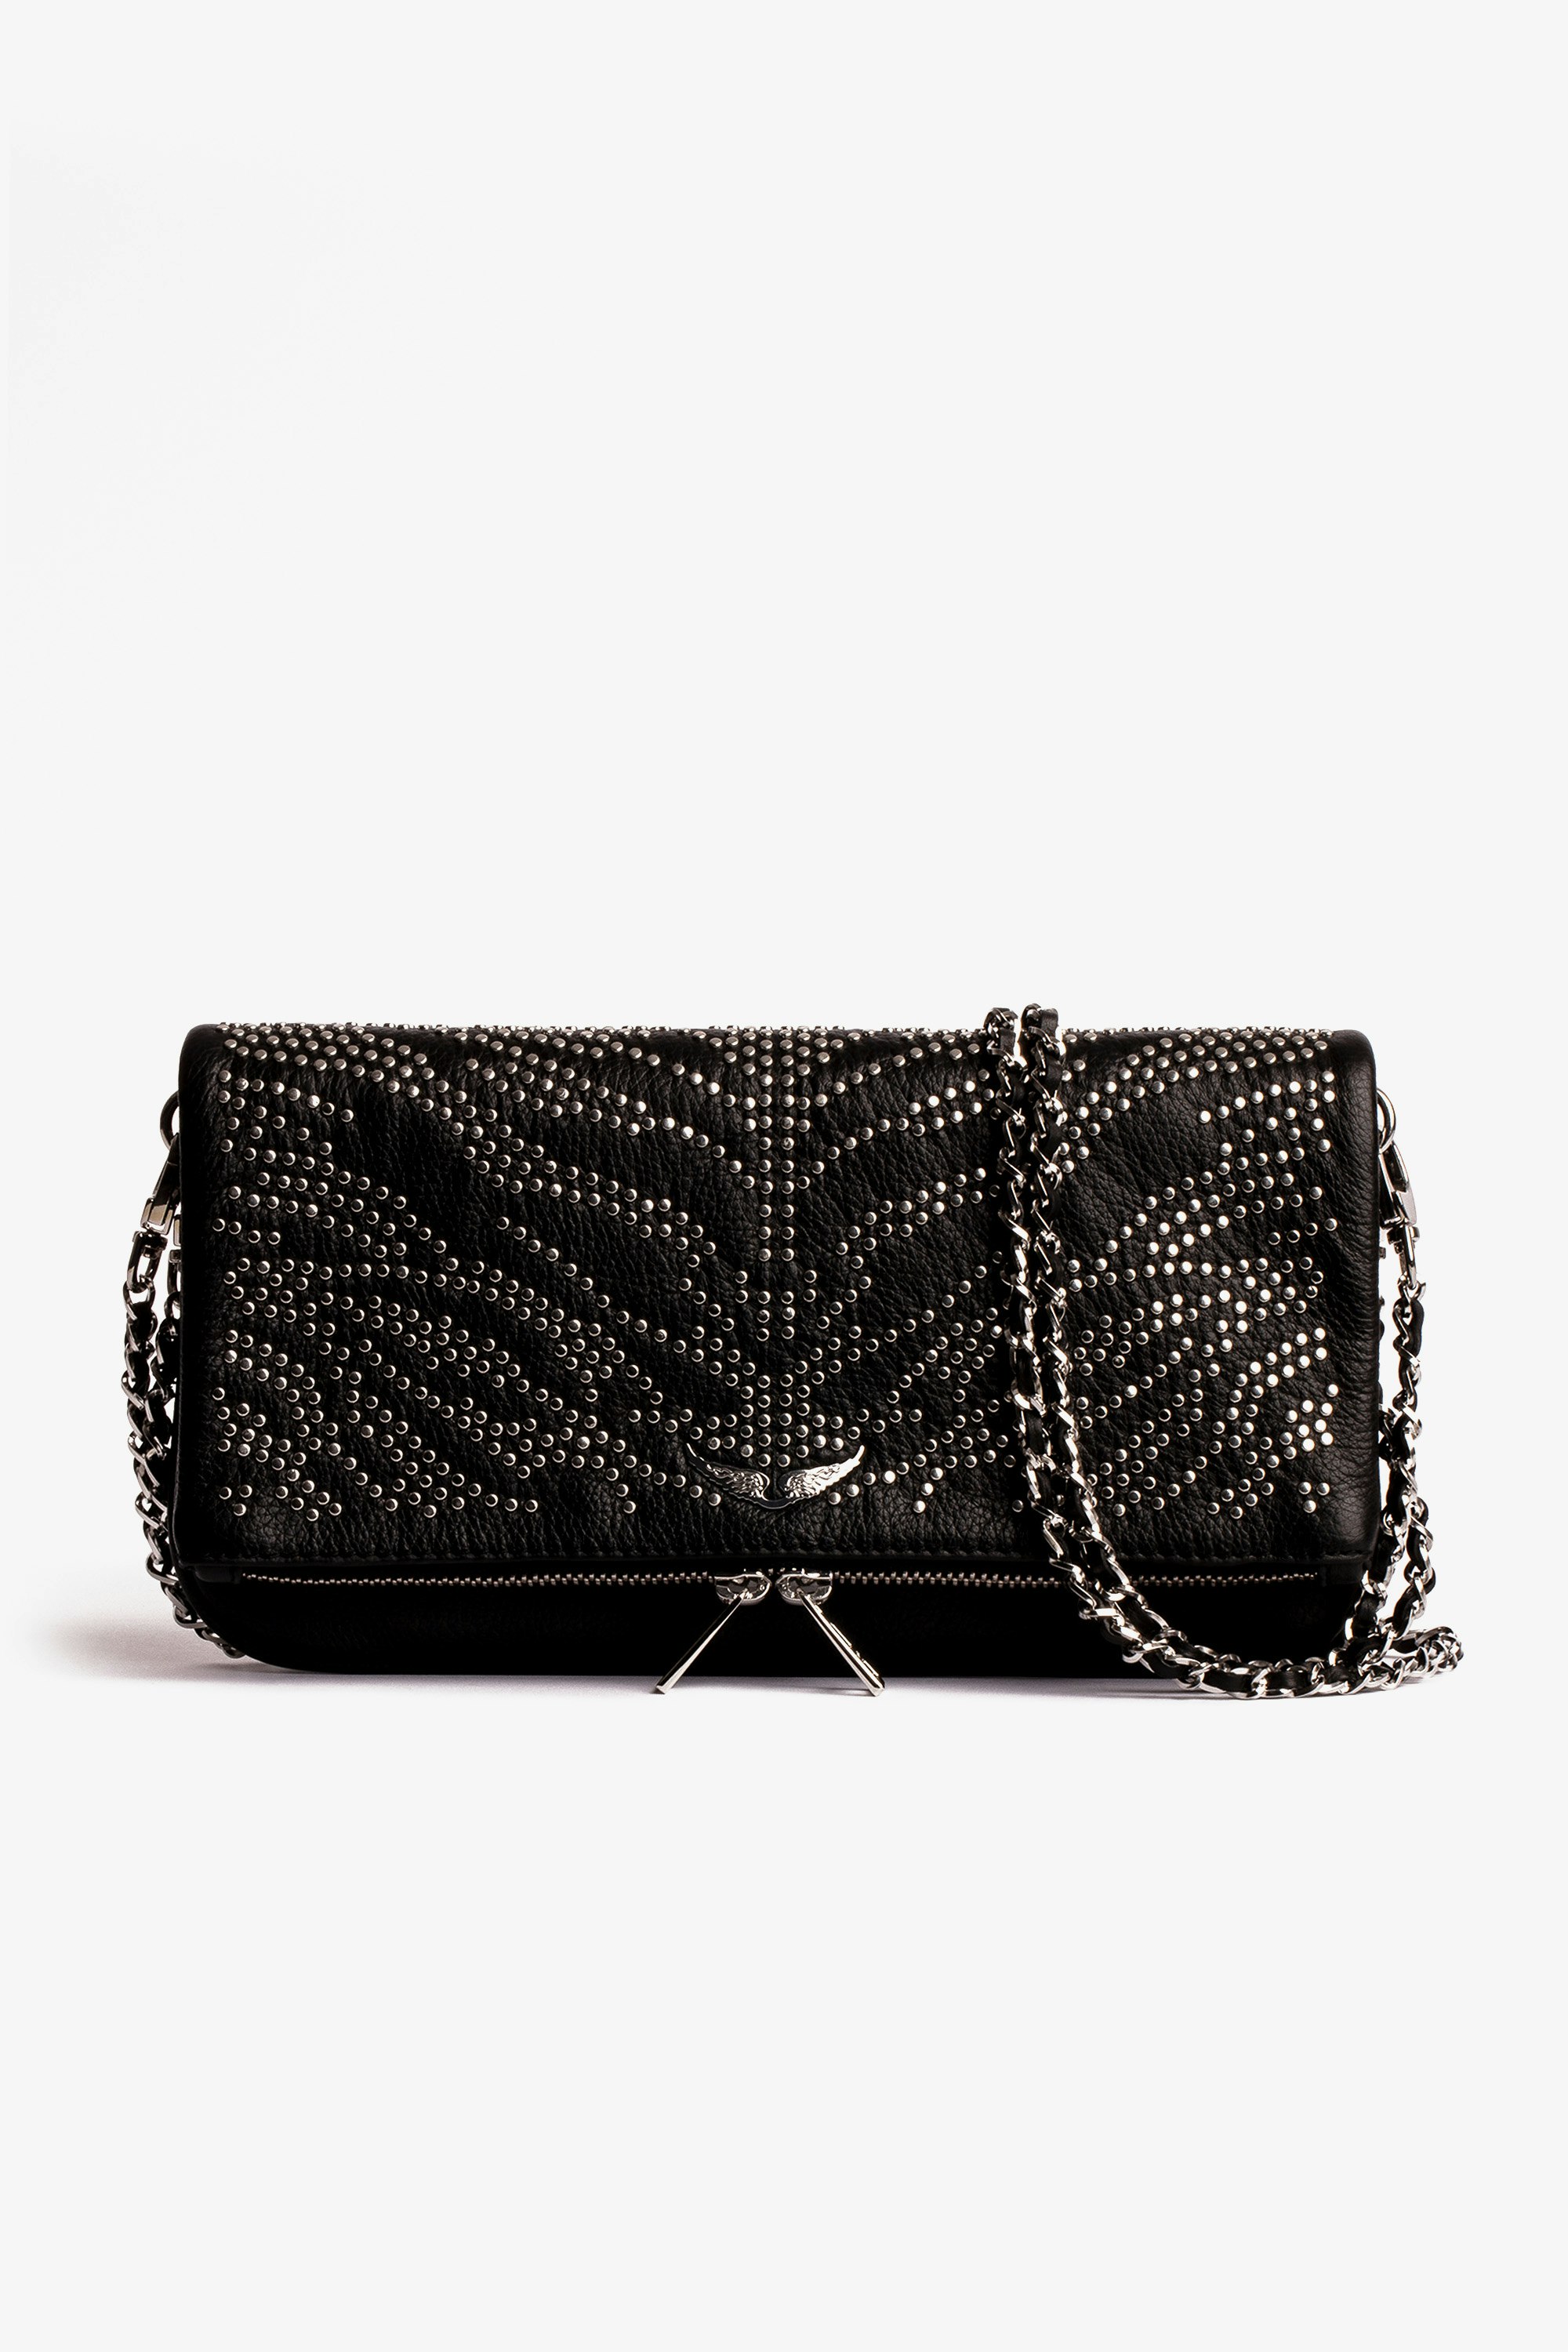 Rock Clutch Women's black grained leather clutch bag with studs